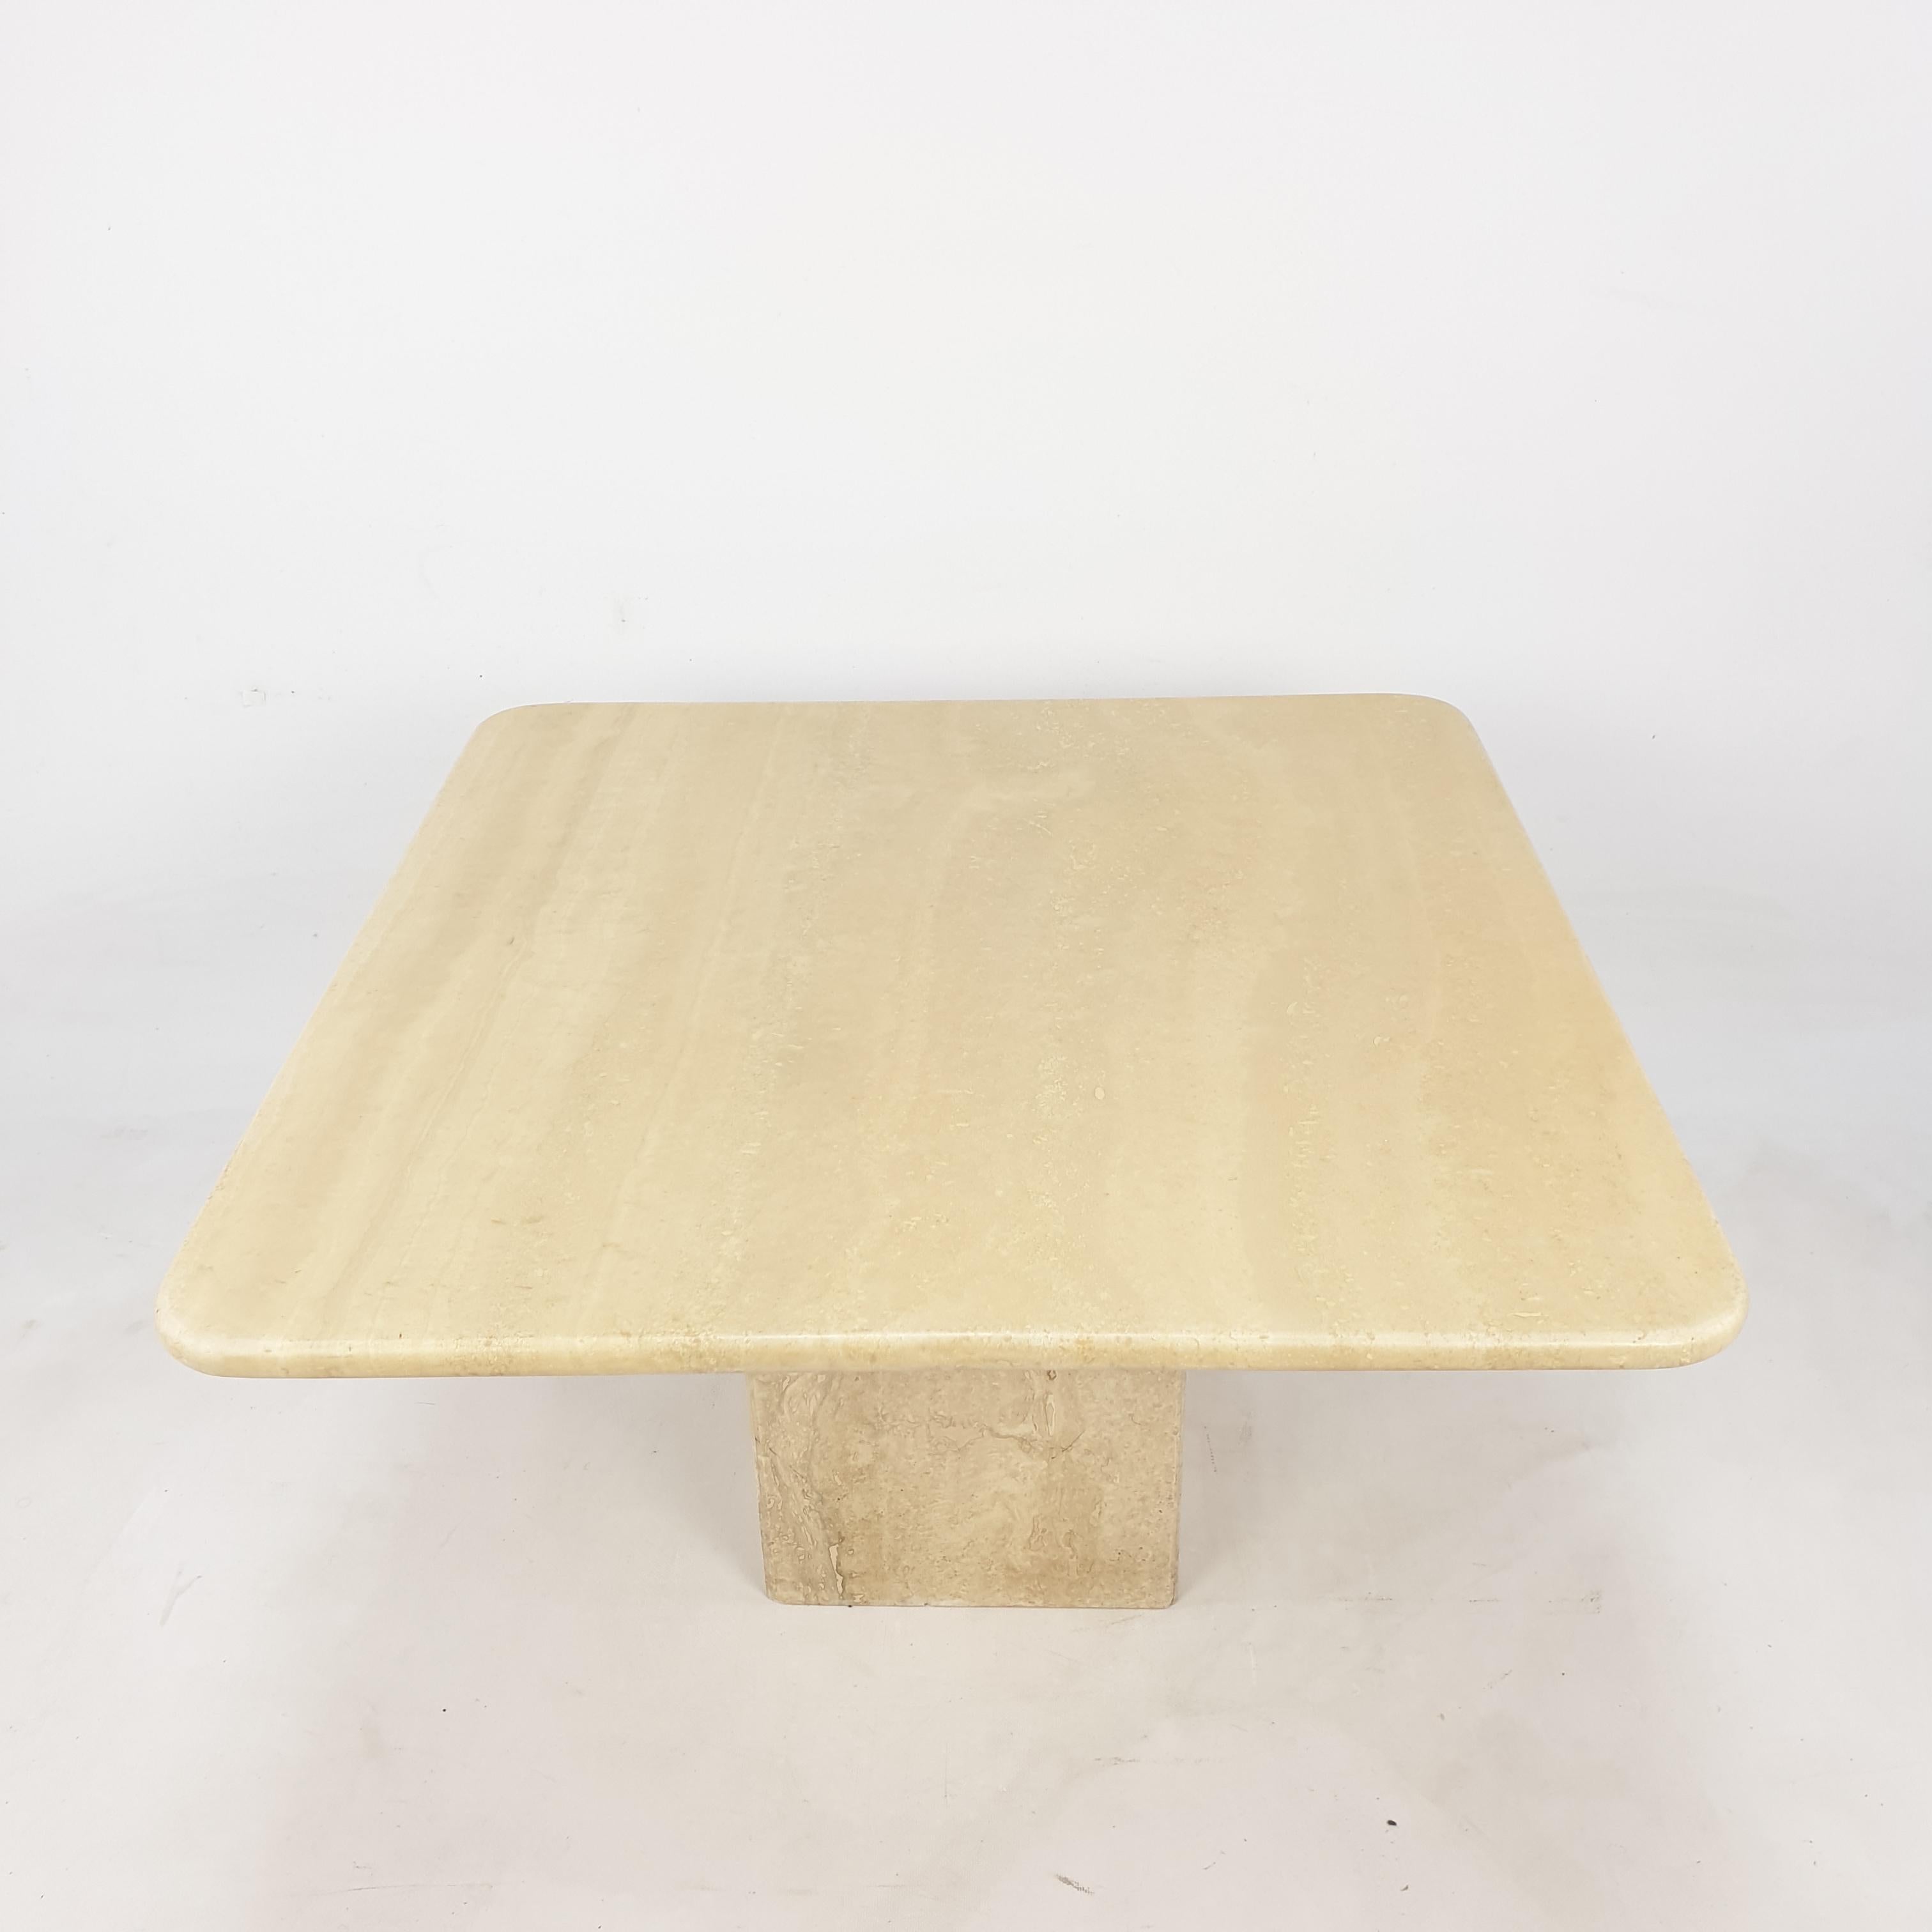 Very nice Italian coffee table from the 80's, handcrafted out of travertine. The top is rounded on the edge. This stunning table will make the perfect addition to any seating or living room decor for years to come.